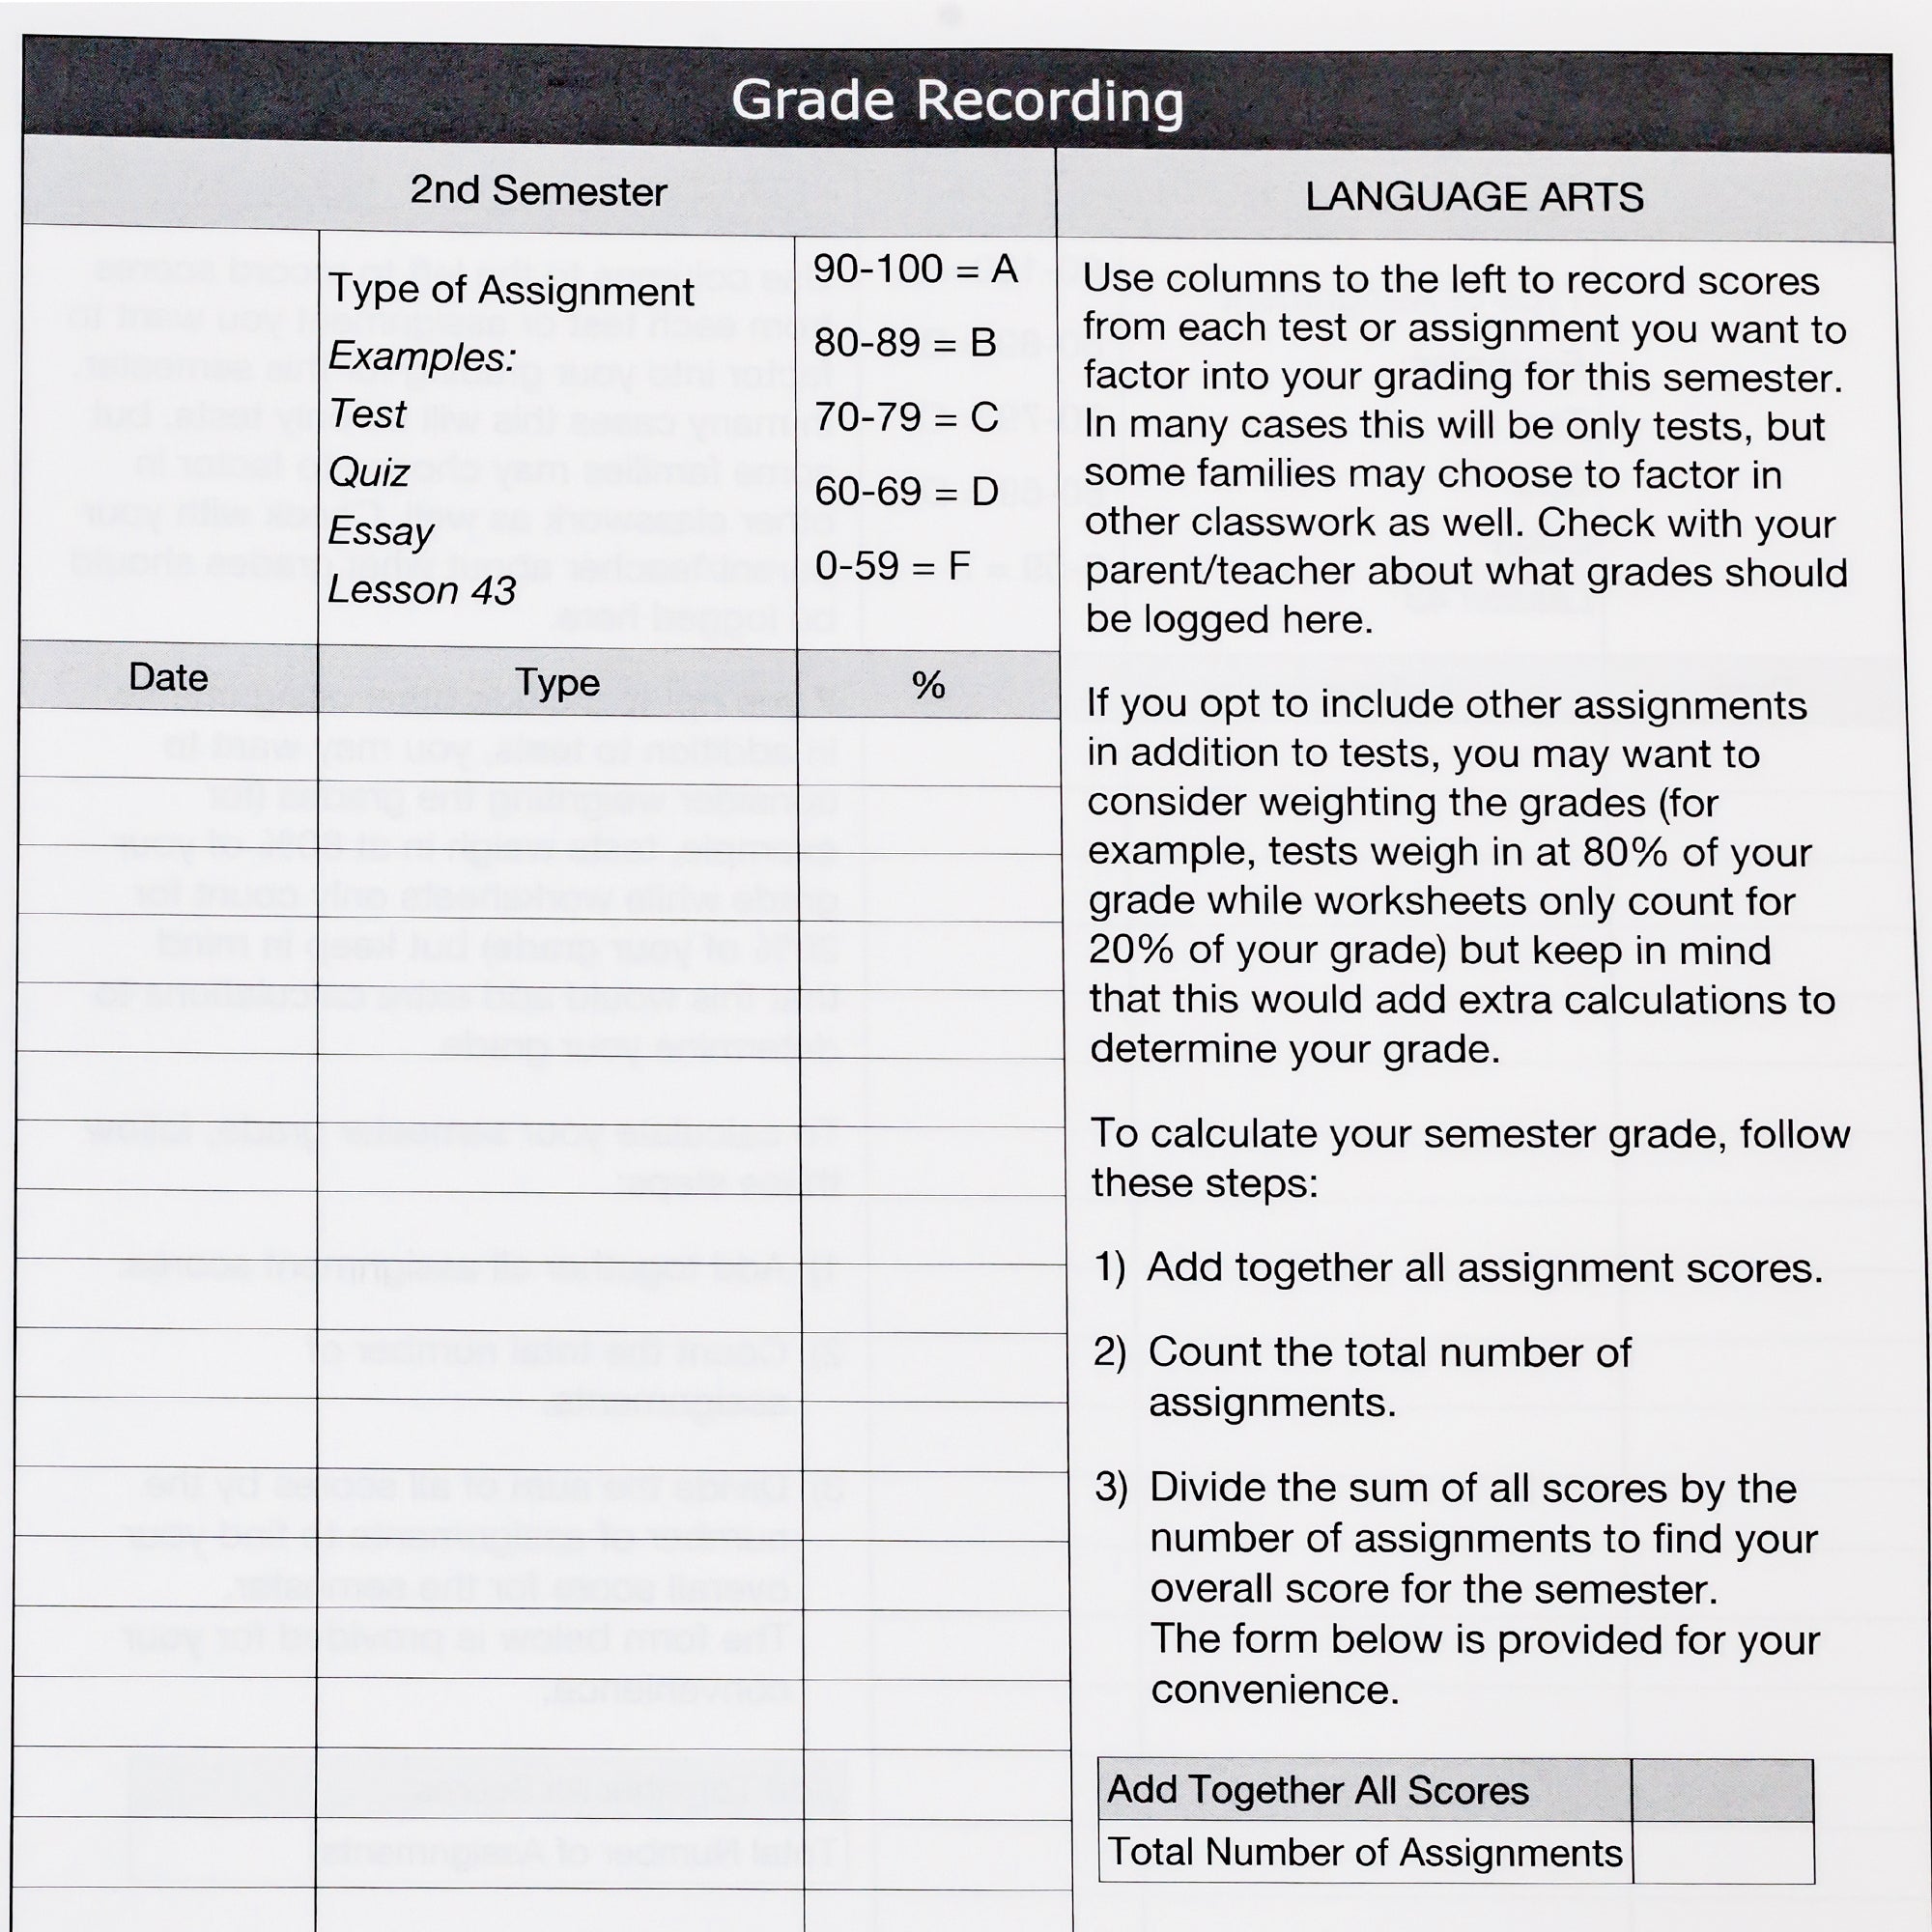 The Timberdoodle 2022 to 2023 High School Planner page showing the Grade Recording. The top is a black bar with white text. Below are sections titled 2nd Semester and Language arts. Under 2nd Semester, it shows the Type of Assignment, how much each is worth, and the grade that is equal to the score. Under that is a table with the titles Date, Type, and %. On the right under Language Arts is description on recording scored and a spot to write in the number of assignments.